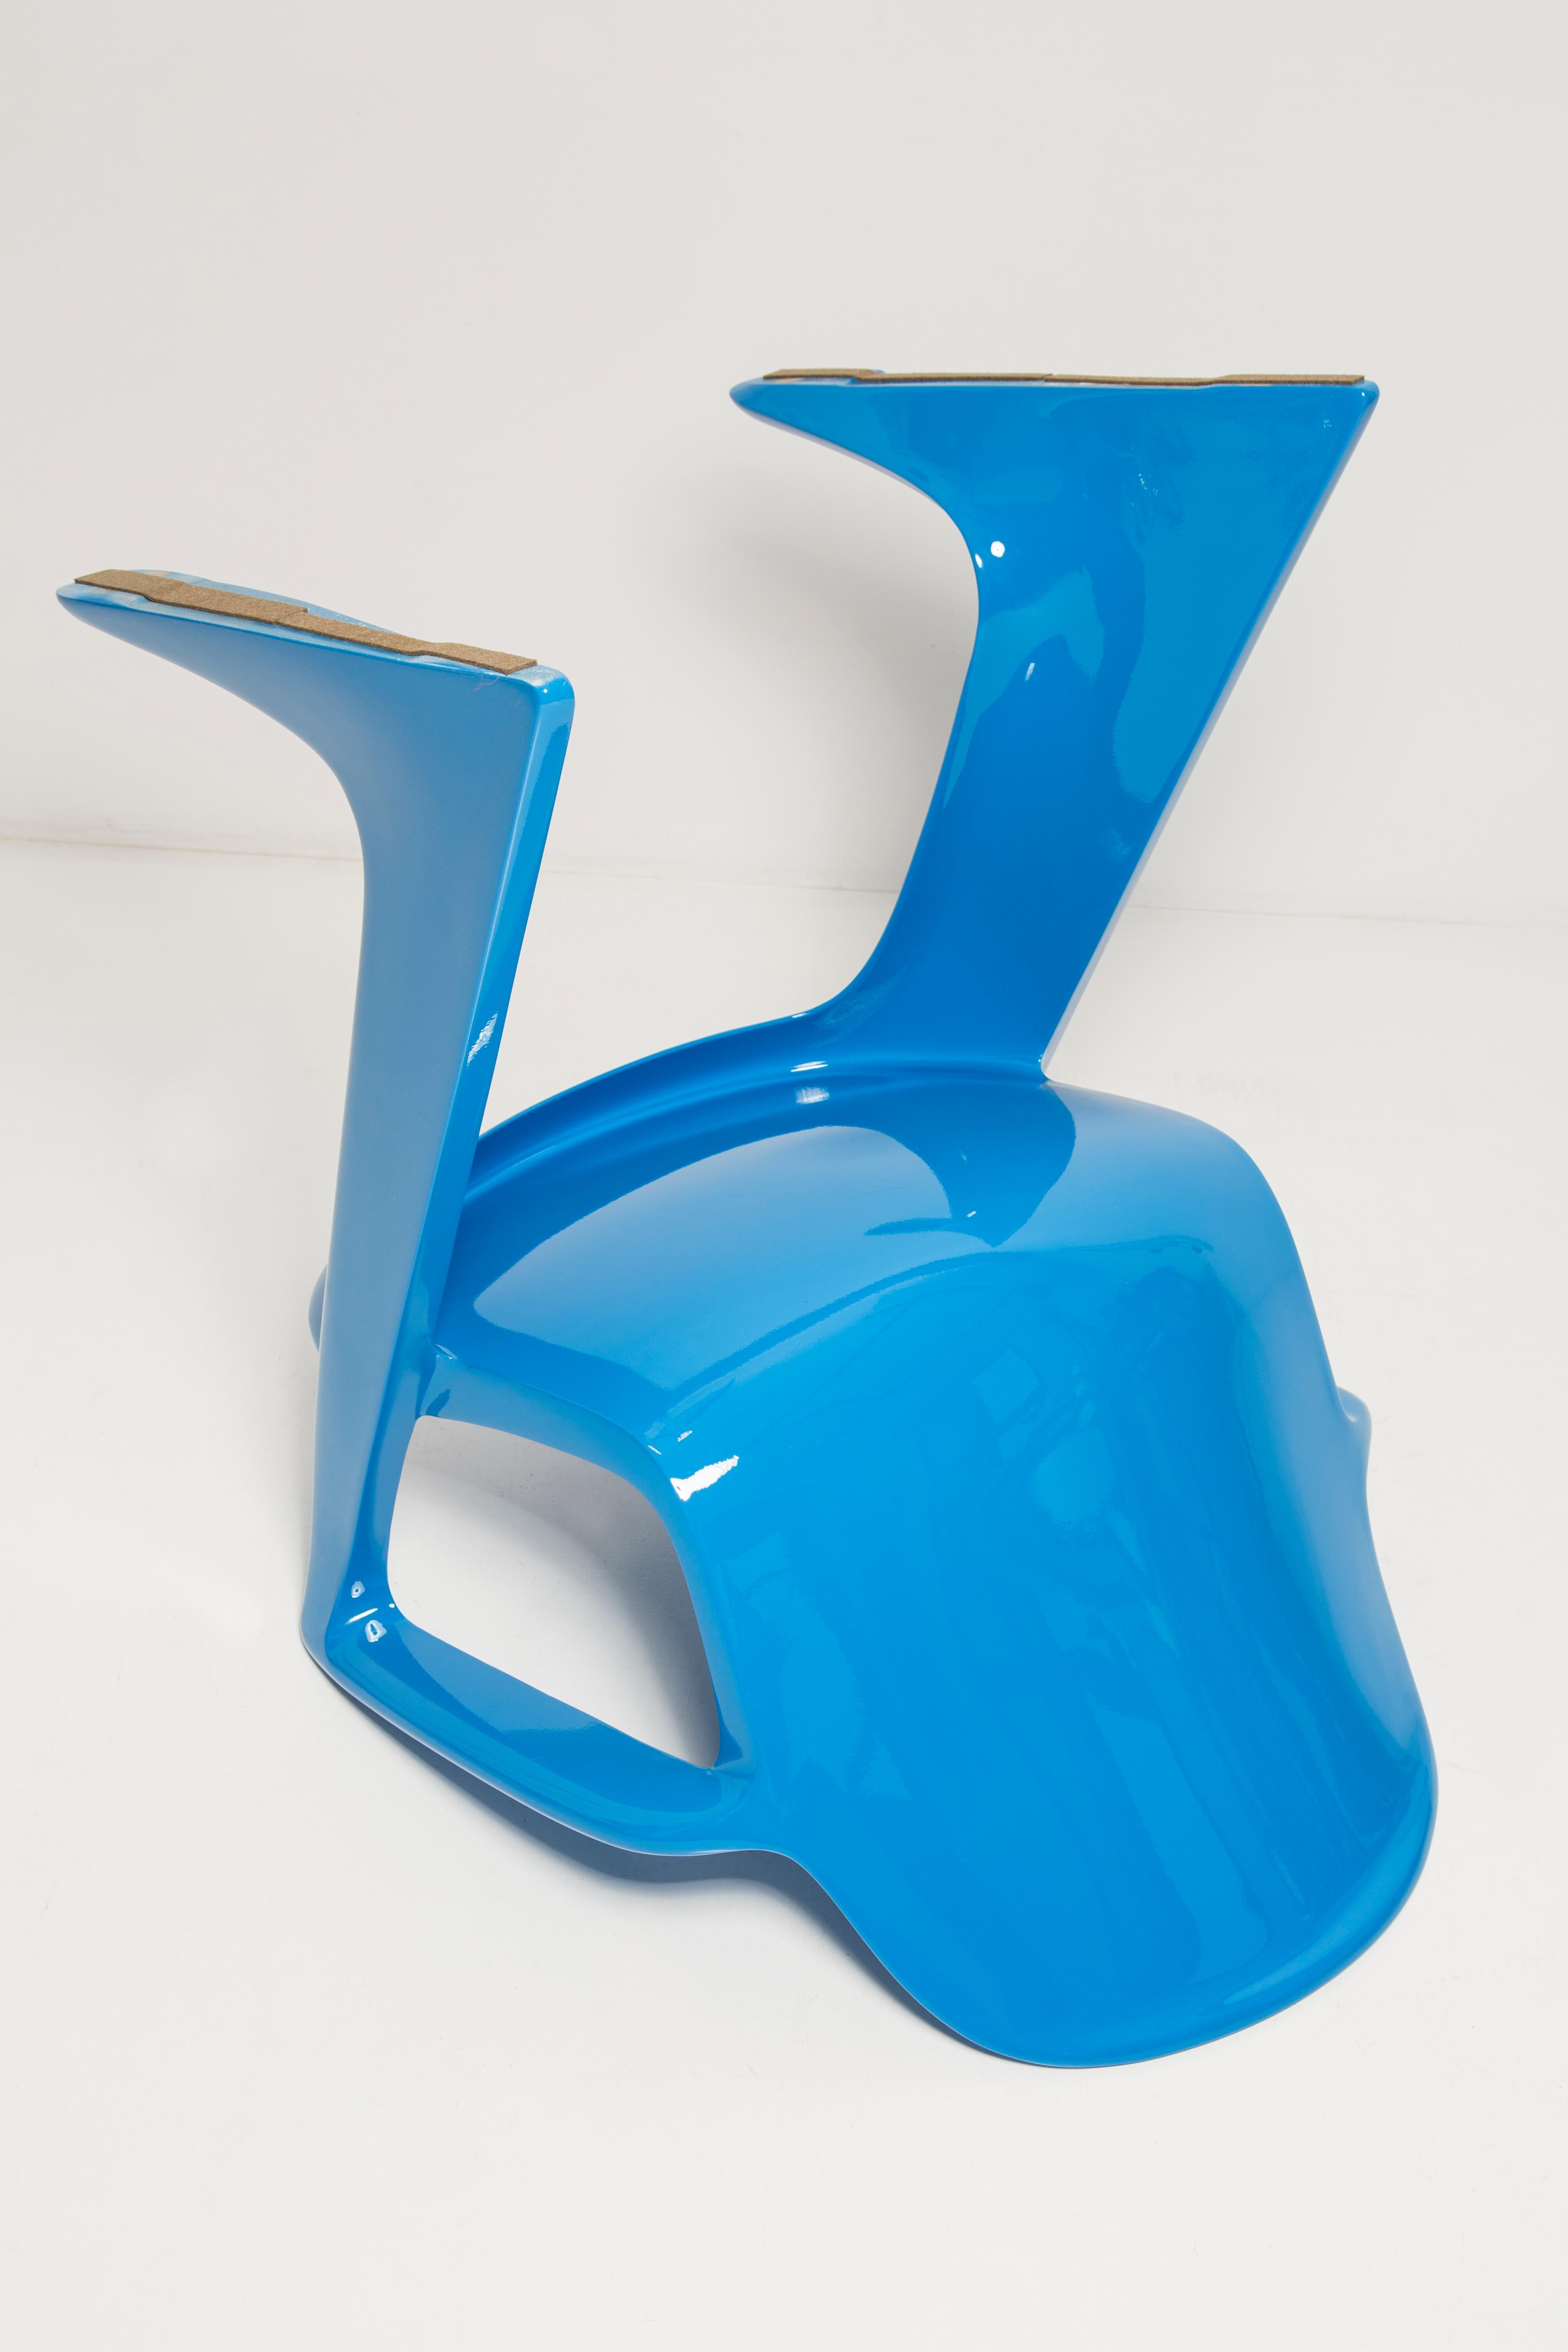 Blue Kangaroo Chair Designed by Ernst Moeckl, Germany, 1968 For Sale 3